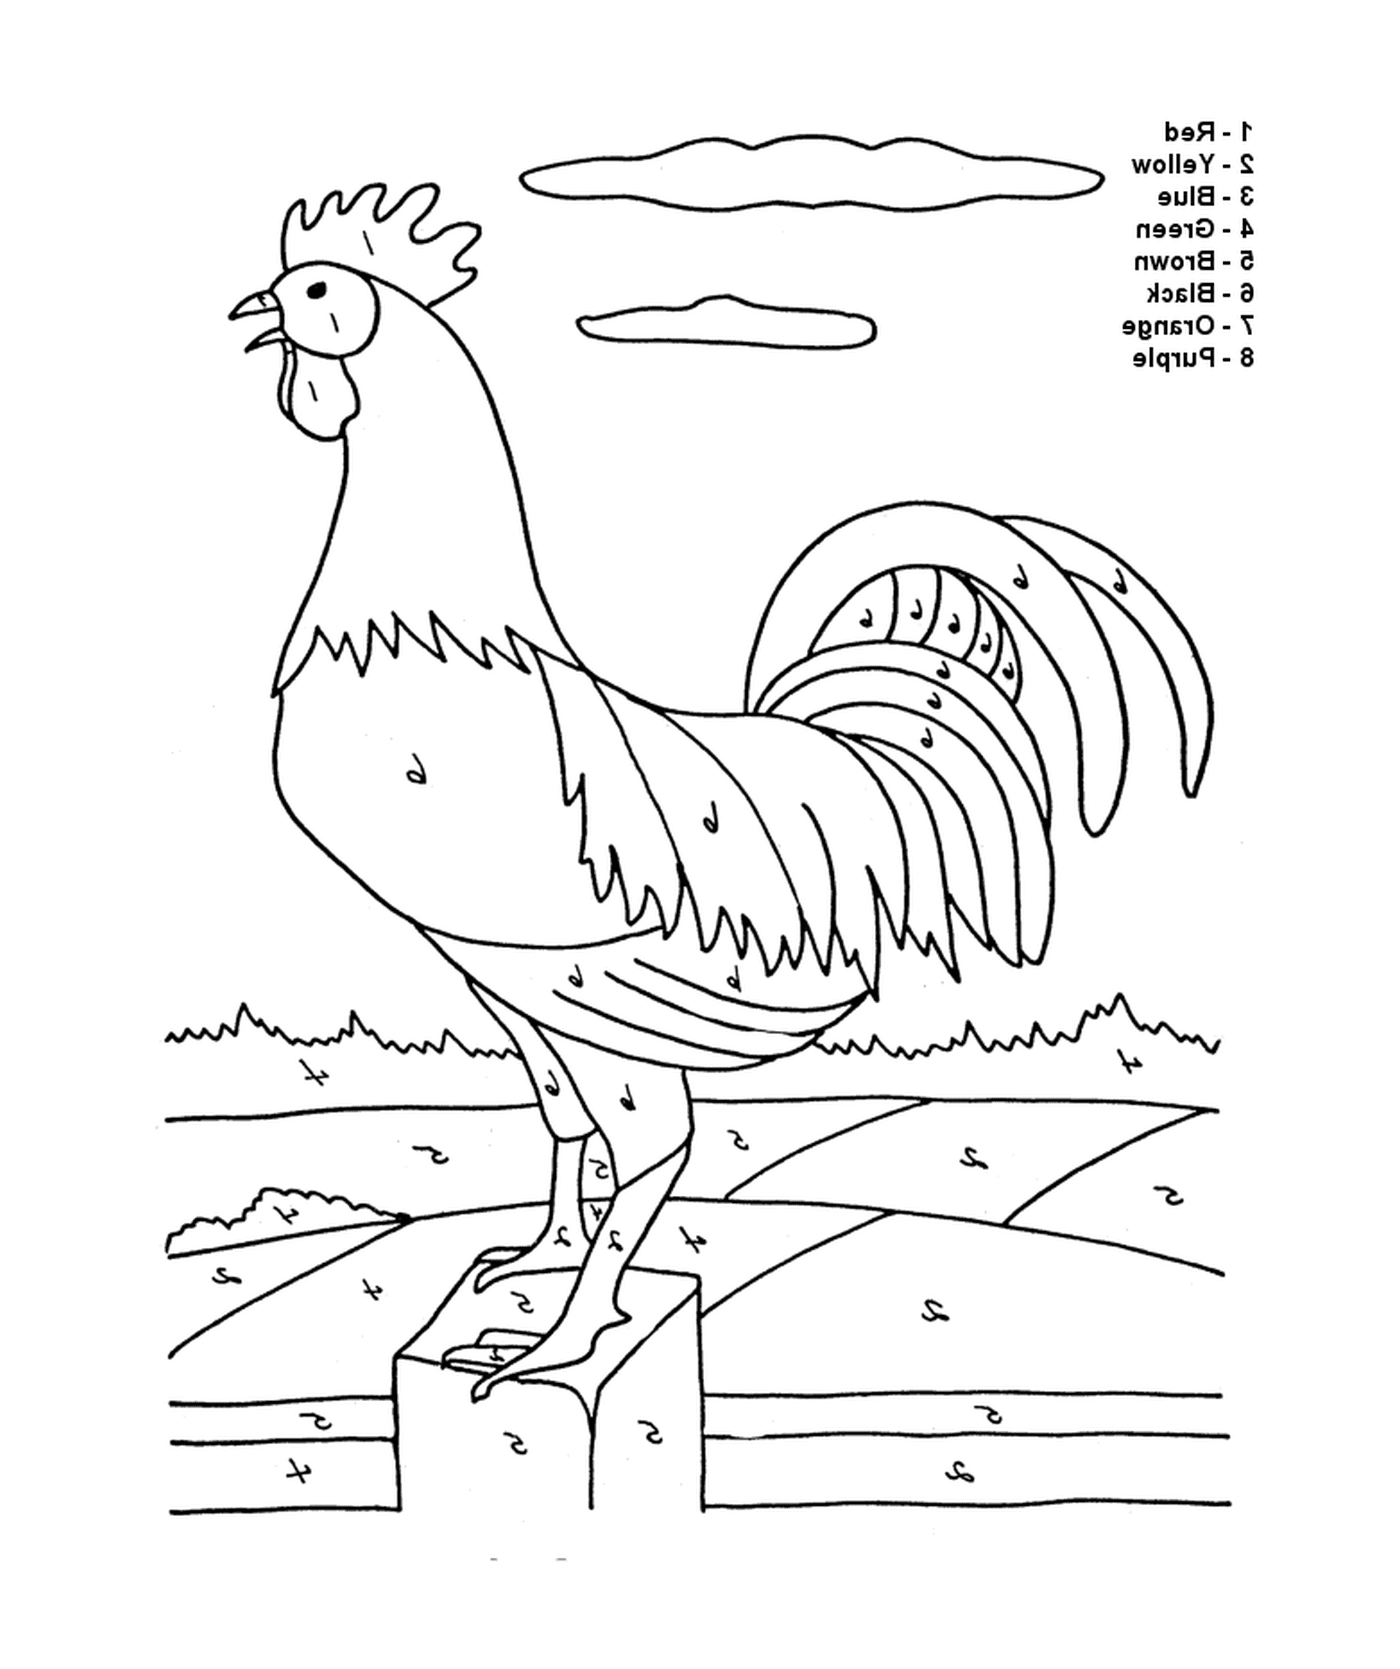  Rooster with numbers 